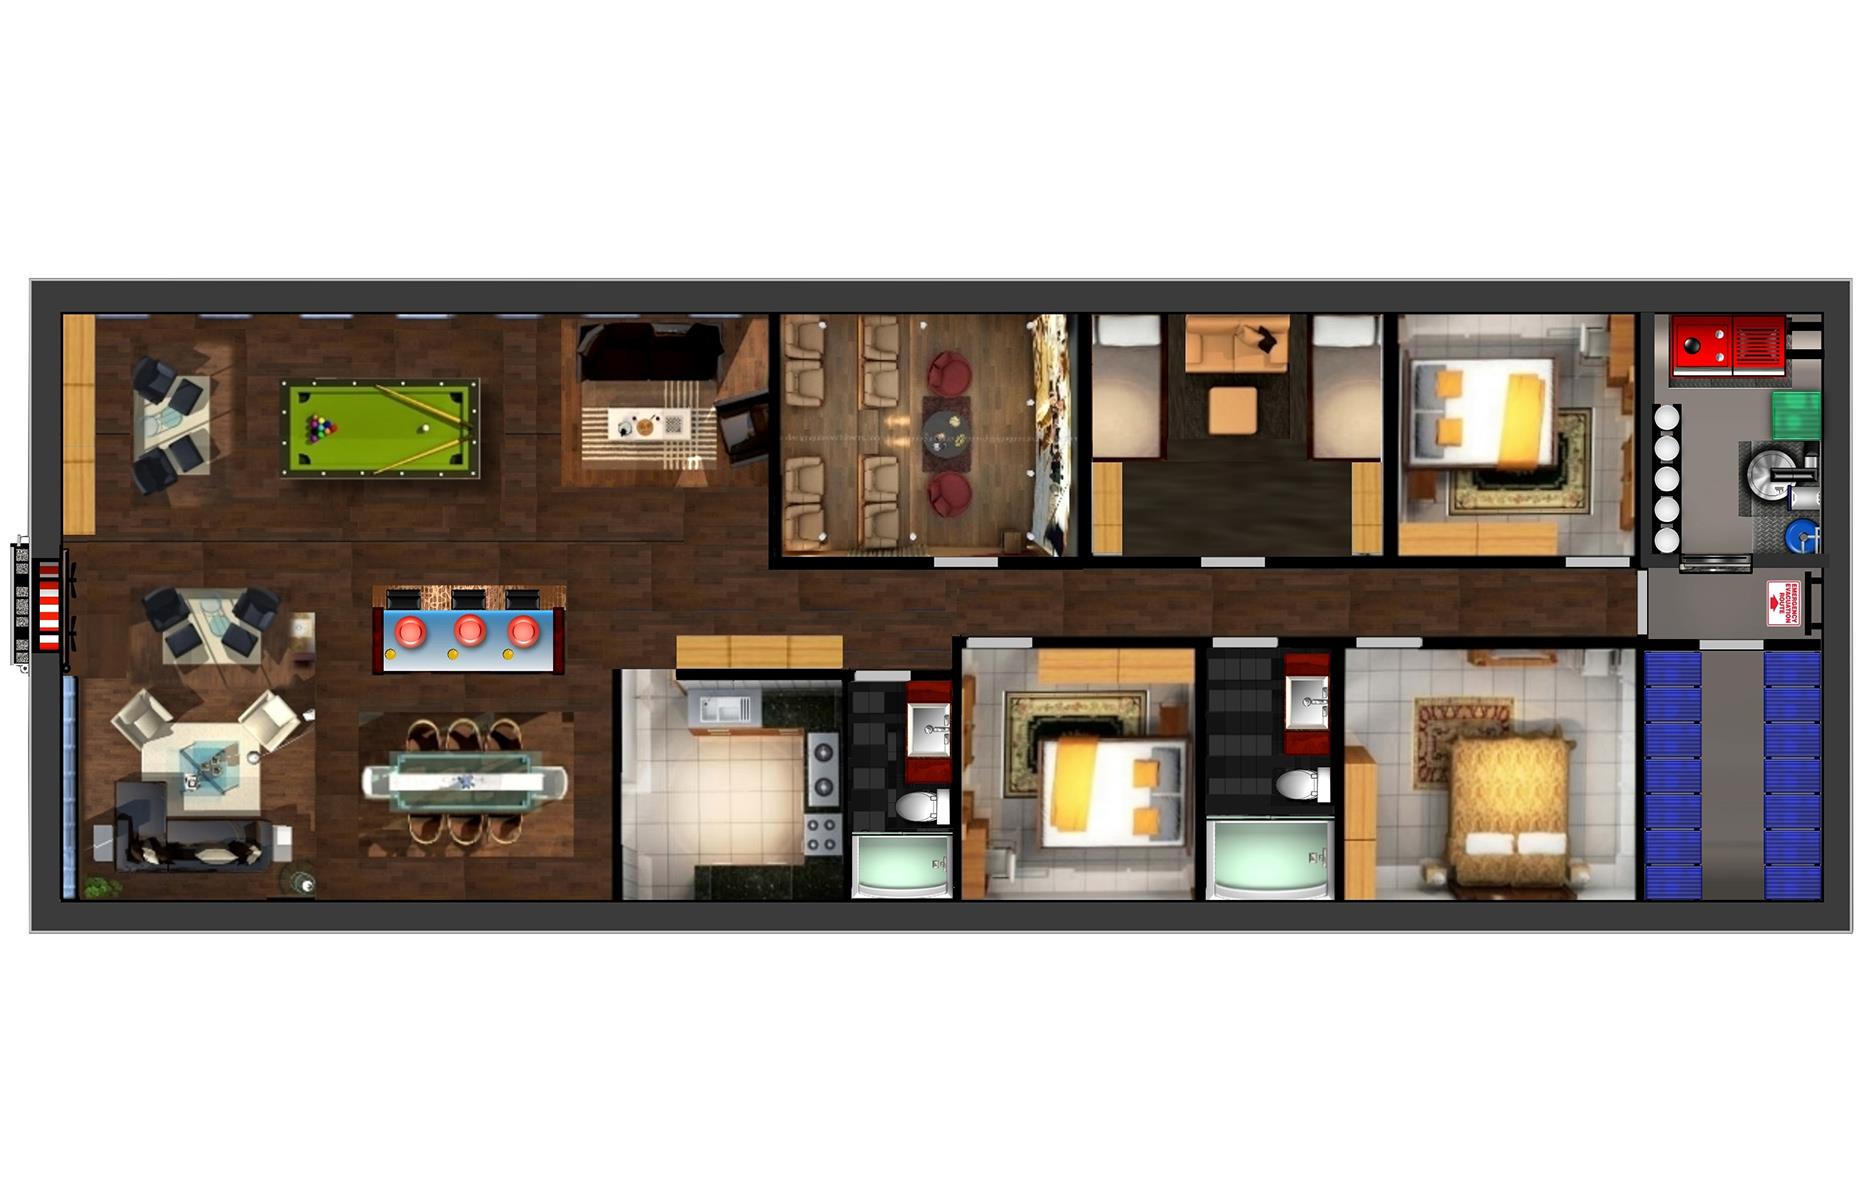 <p>For survivalists with a taste for the finer things in life, the sky's the limit when it comes to customization.</p>  <p>Pictured here, Vivos' deluxe floor plan offers an idea of the luxe bunker setup you could create – if you can foot the bill that is. The perfect billionaire bolthole, this extravagant design even comes with a home cinema.</p>